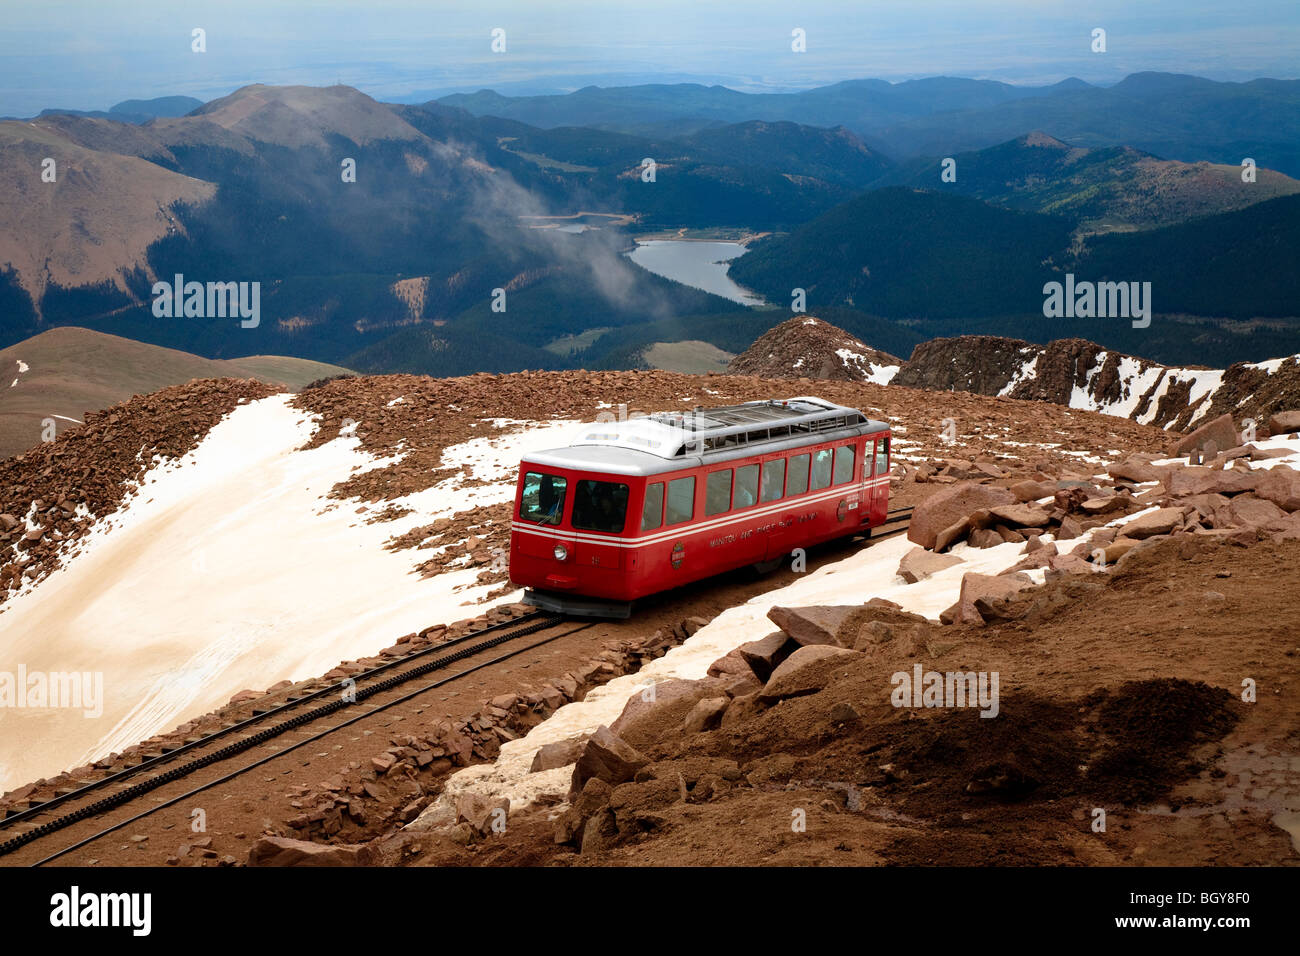 View over mountains from Pikes Peak 14110 foot summit and the world's highest cog train, Colorado, USA Stock Photo